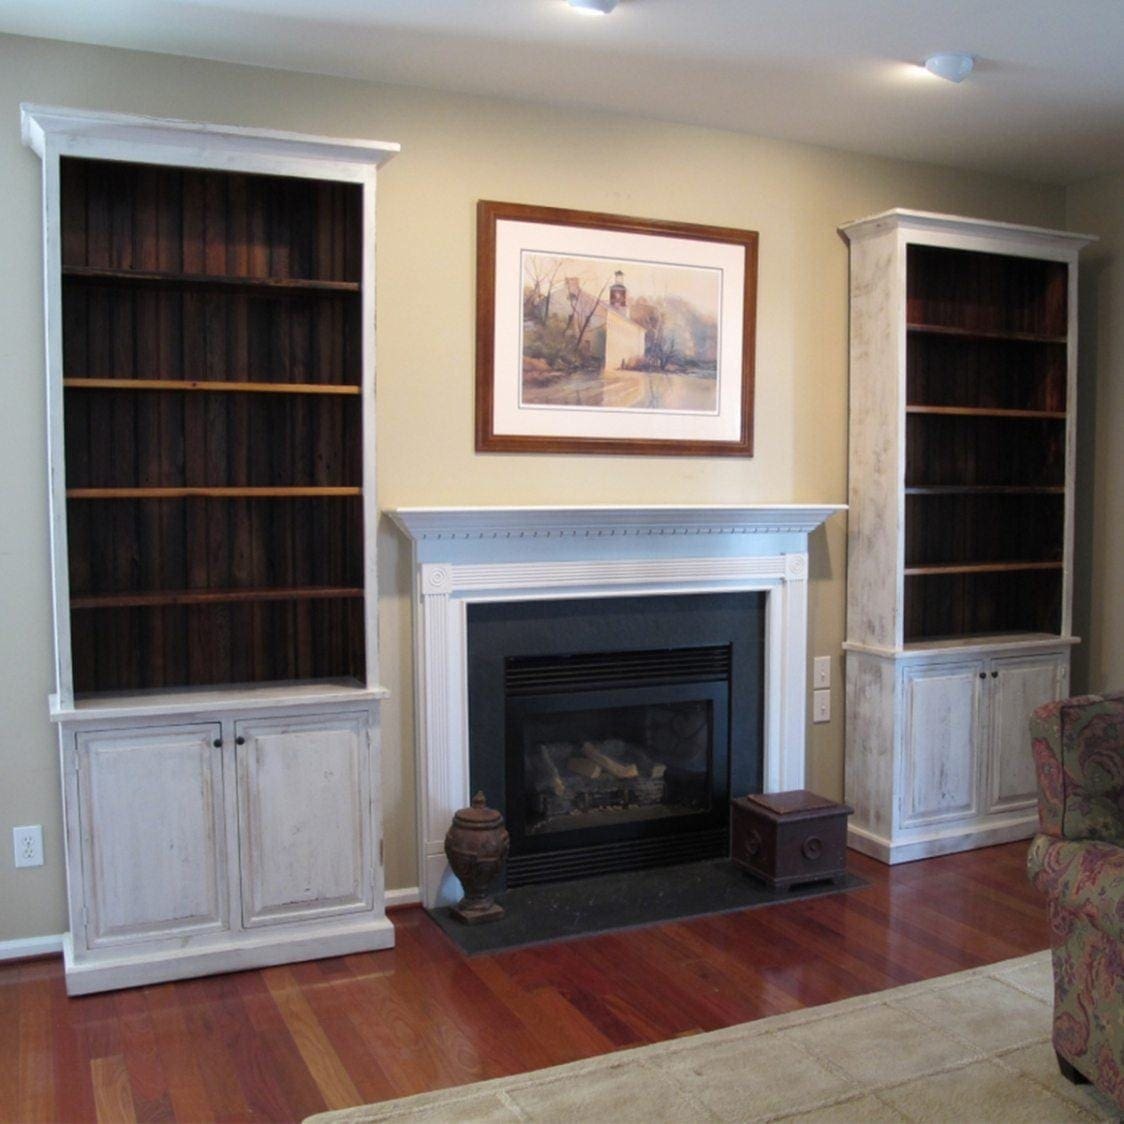 Bookcases With Doors Furniture From, Bookshelves For Each Side Of Fireplace